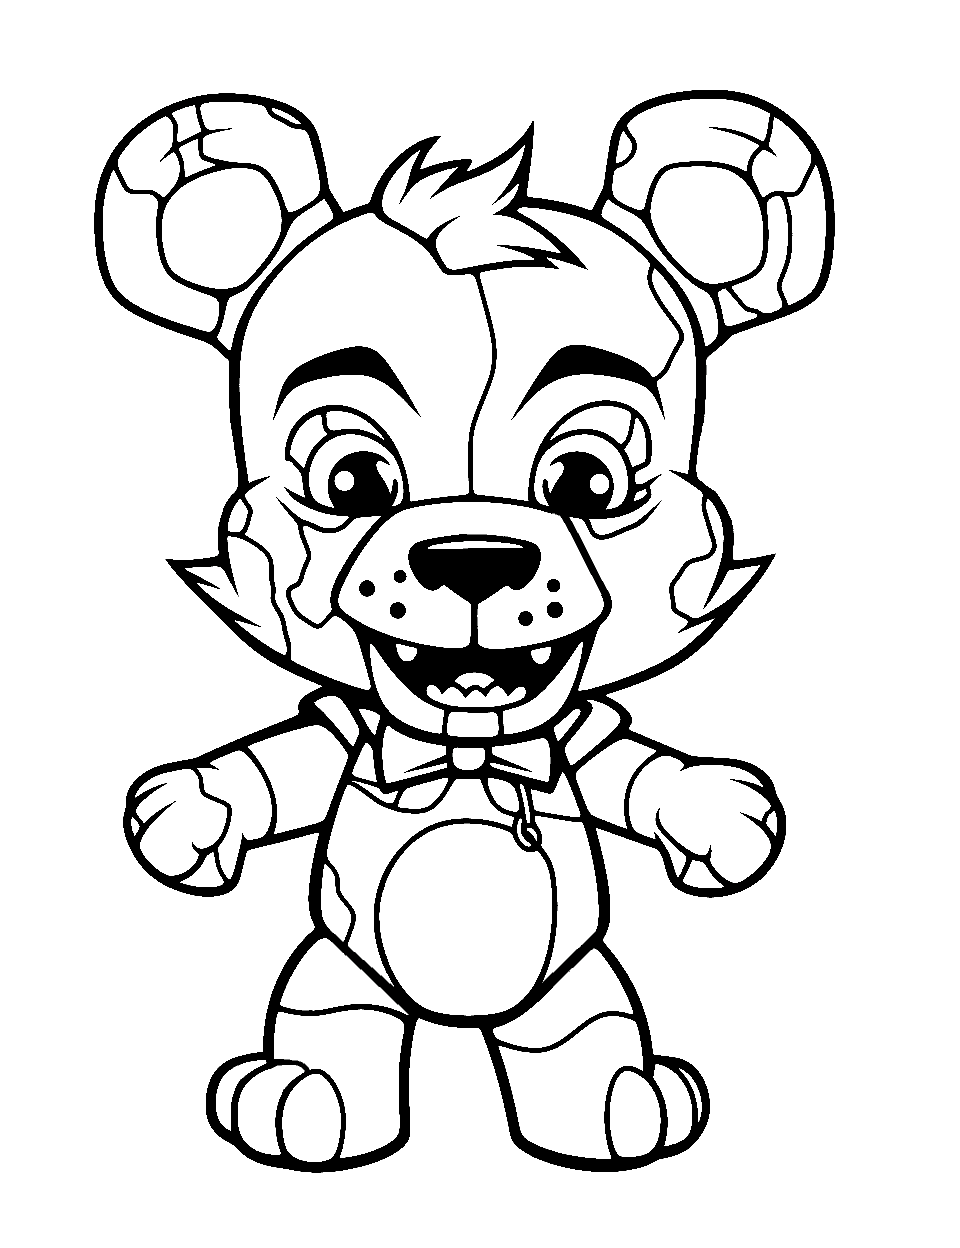 Chibi Freddy’s Fun Coloring Page - Freddy, in chibi form looking like a toy.